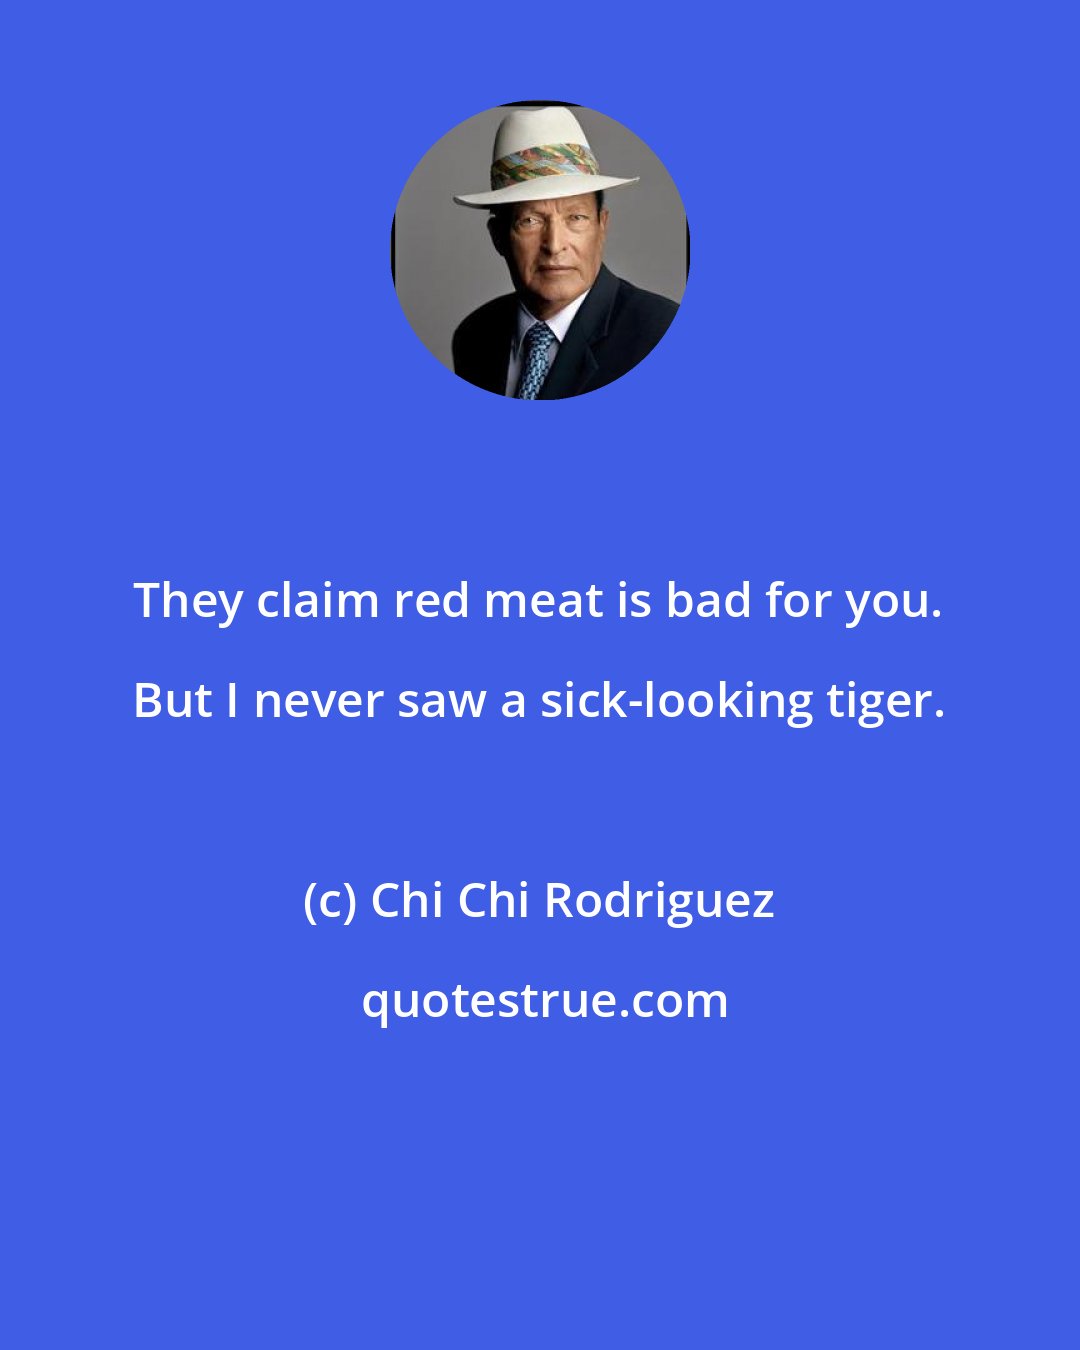 Chi Chi Rodriguez: They claim red meat is bad for you. But I never saw a sick-looking tiger.